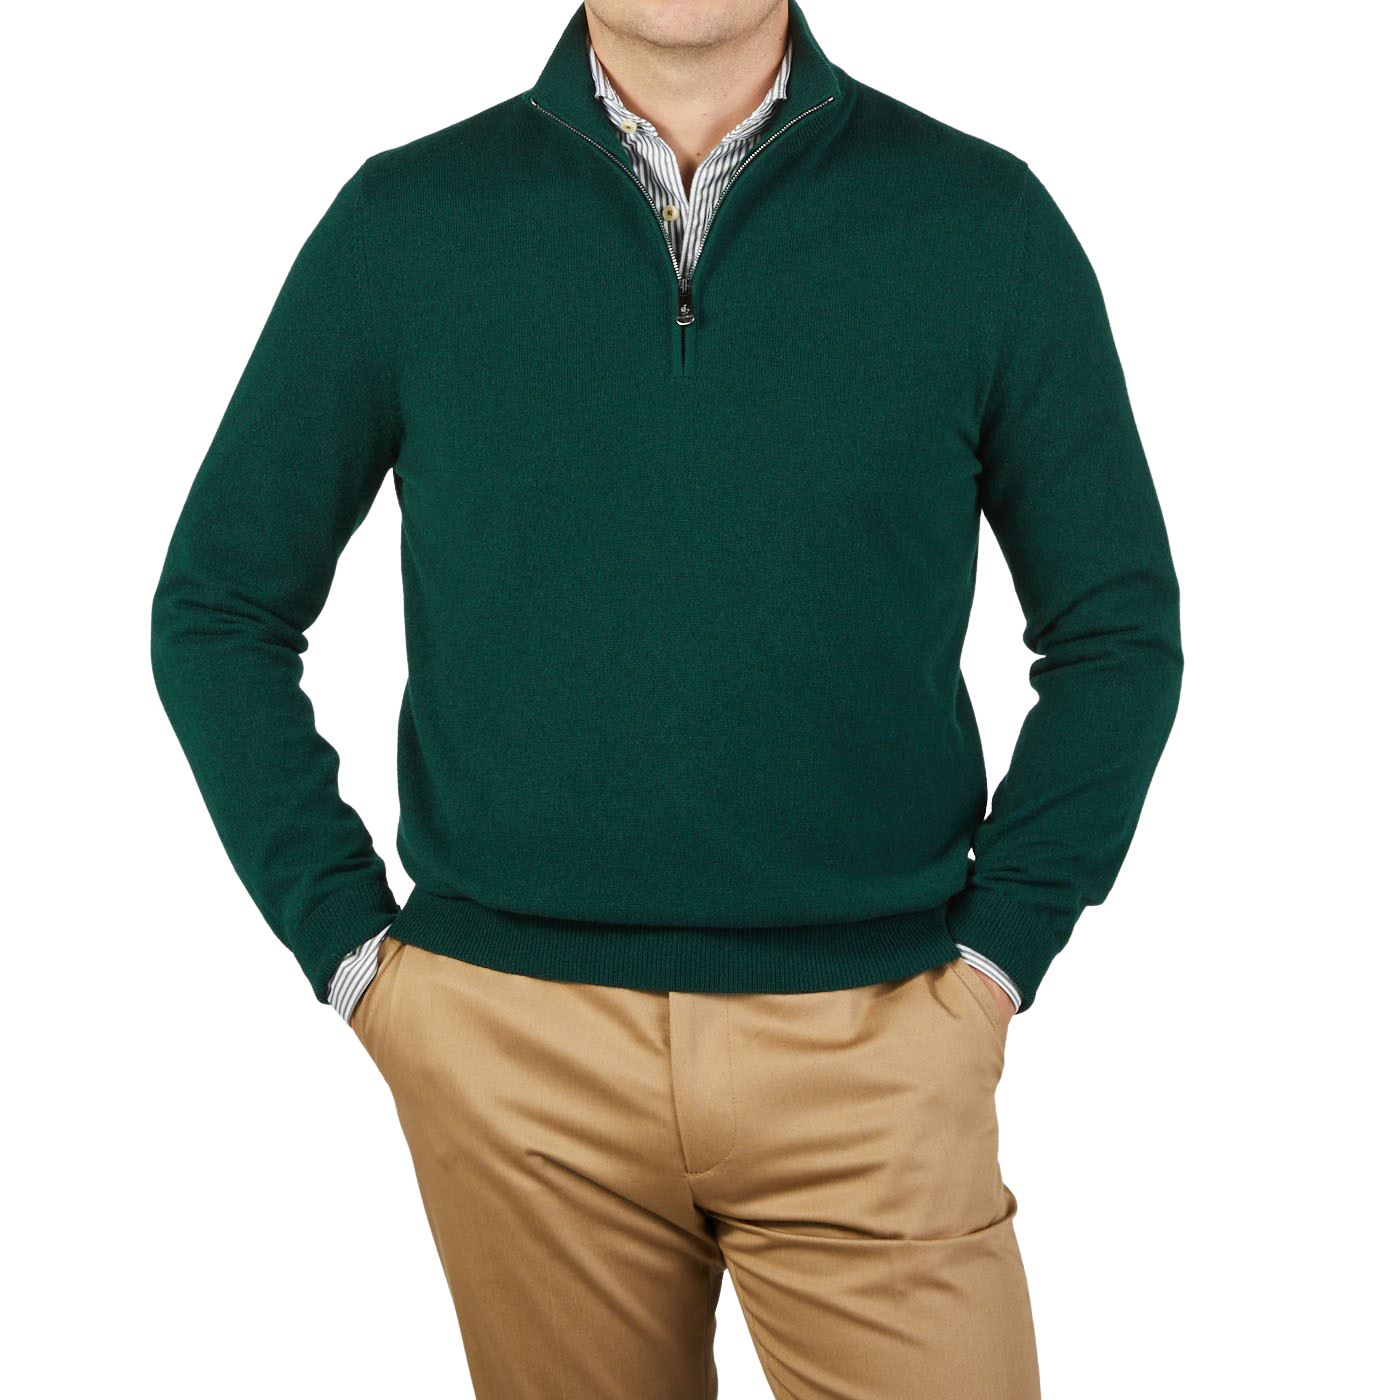 Piacenza Cashmere Bottle Green Cashmere 1:4 Zip Sweater Front